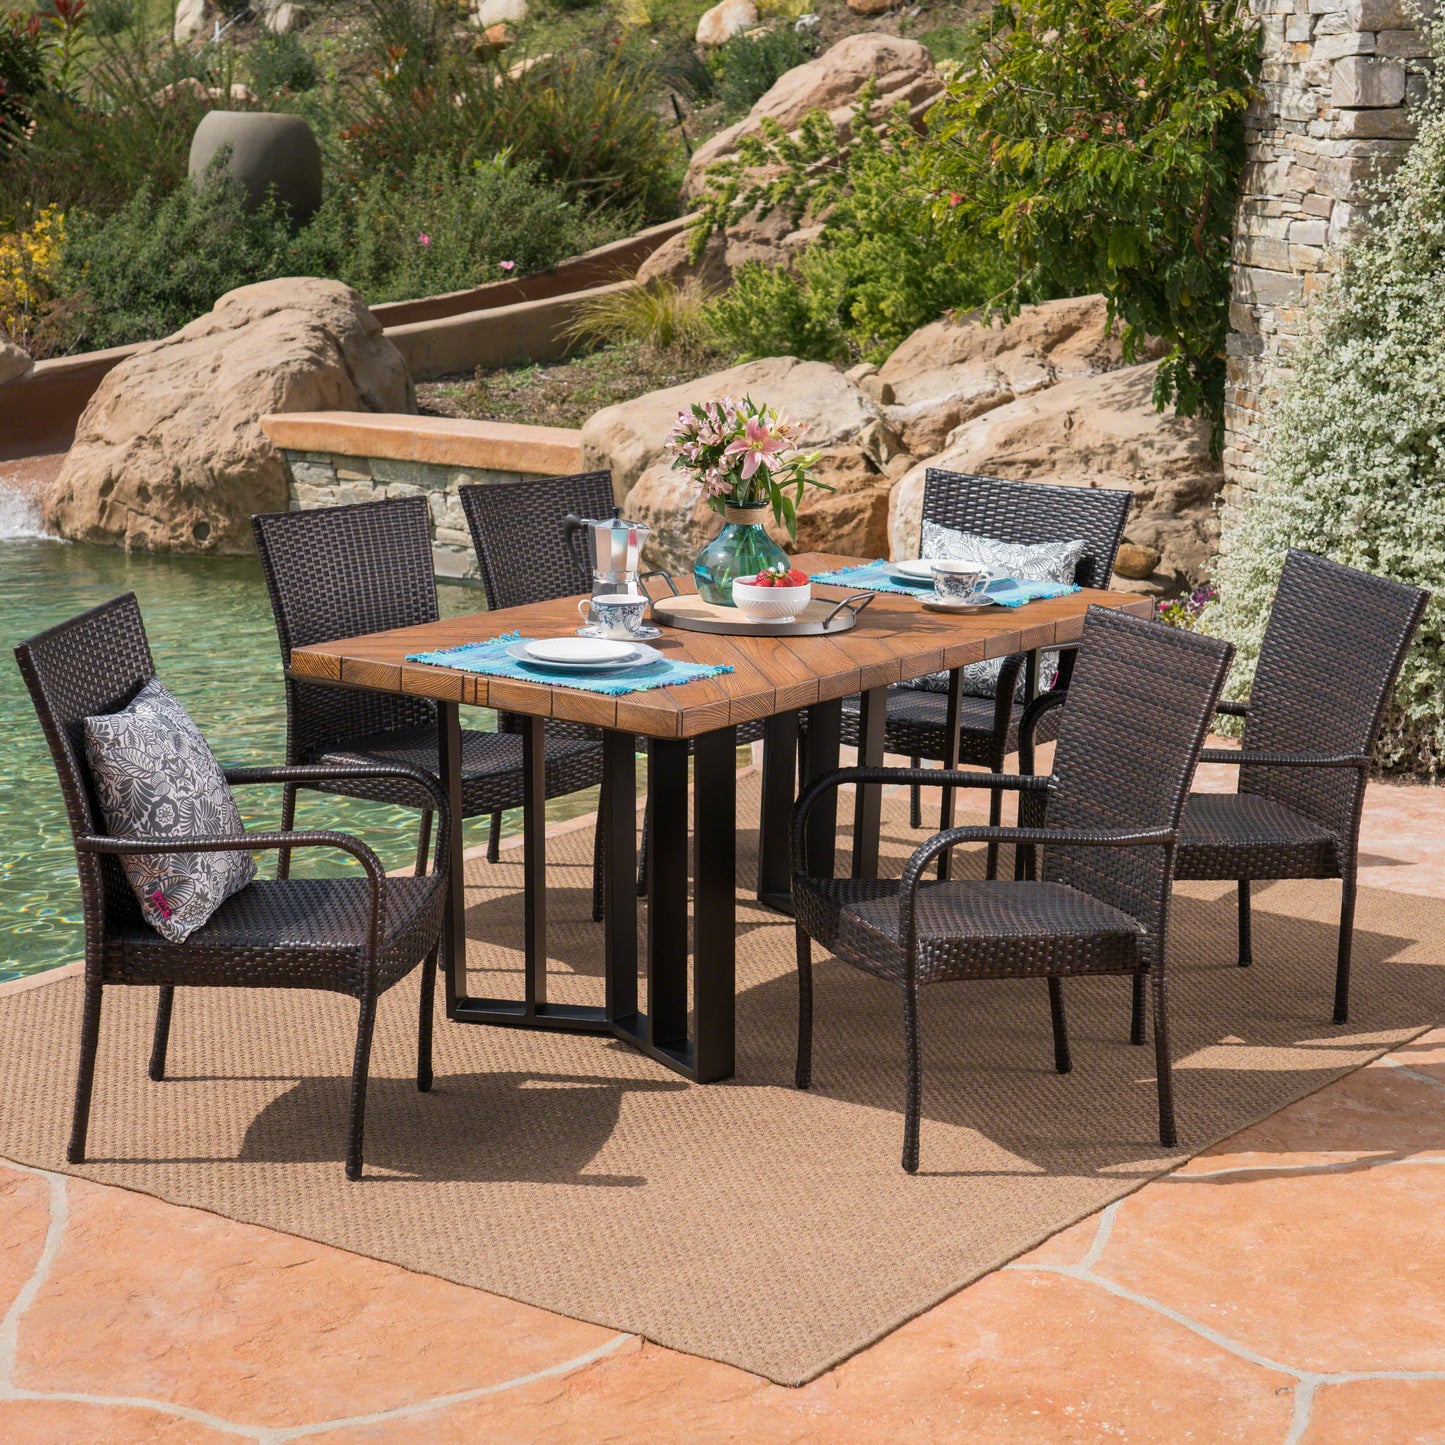 Fiona Outdoor 7 Piece Wicker Dining Set with Concrete Dining Table